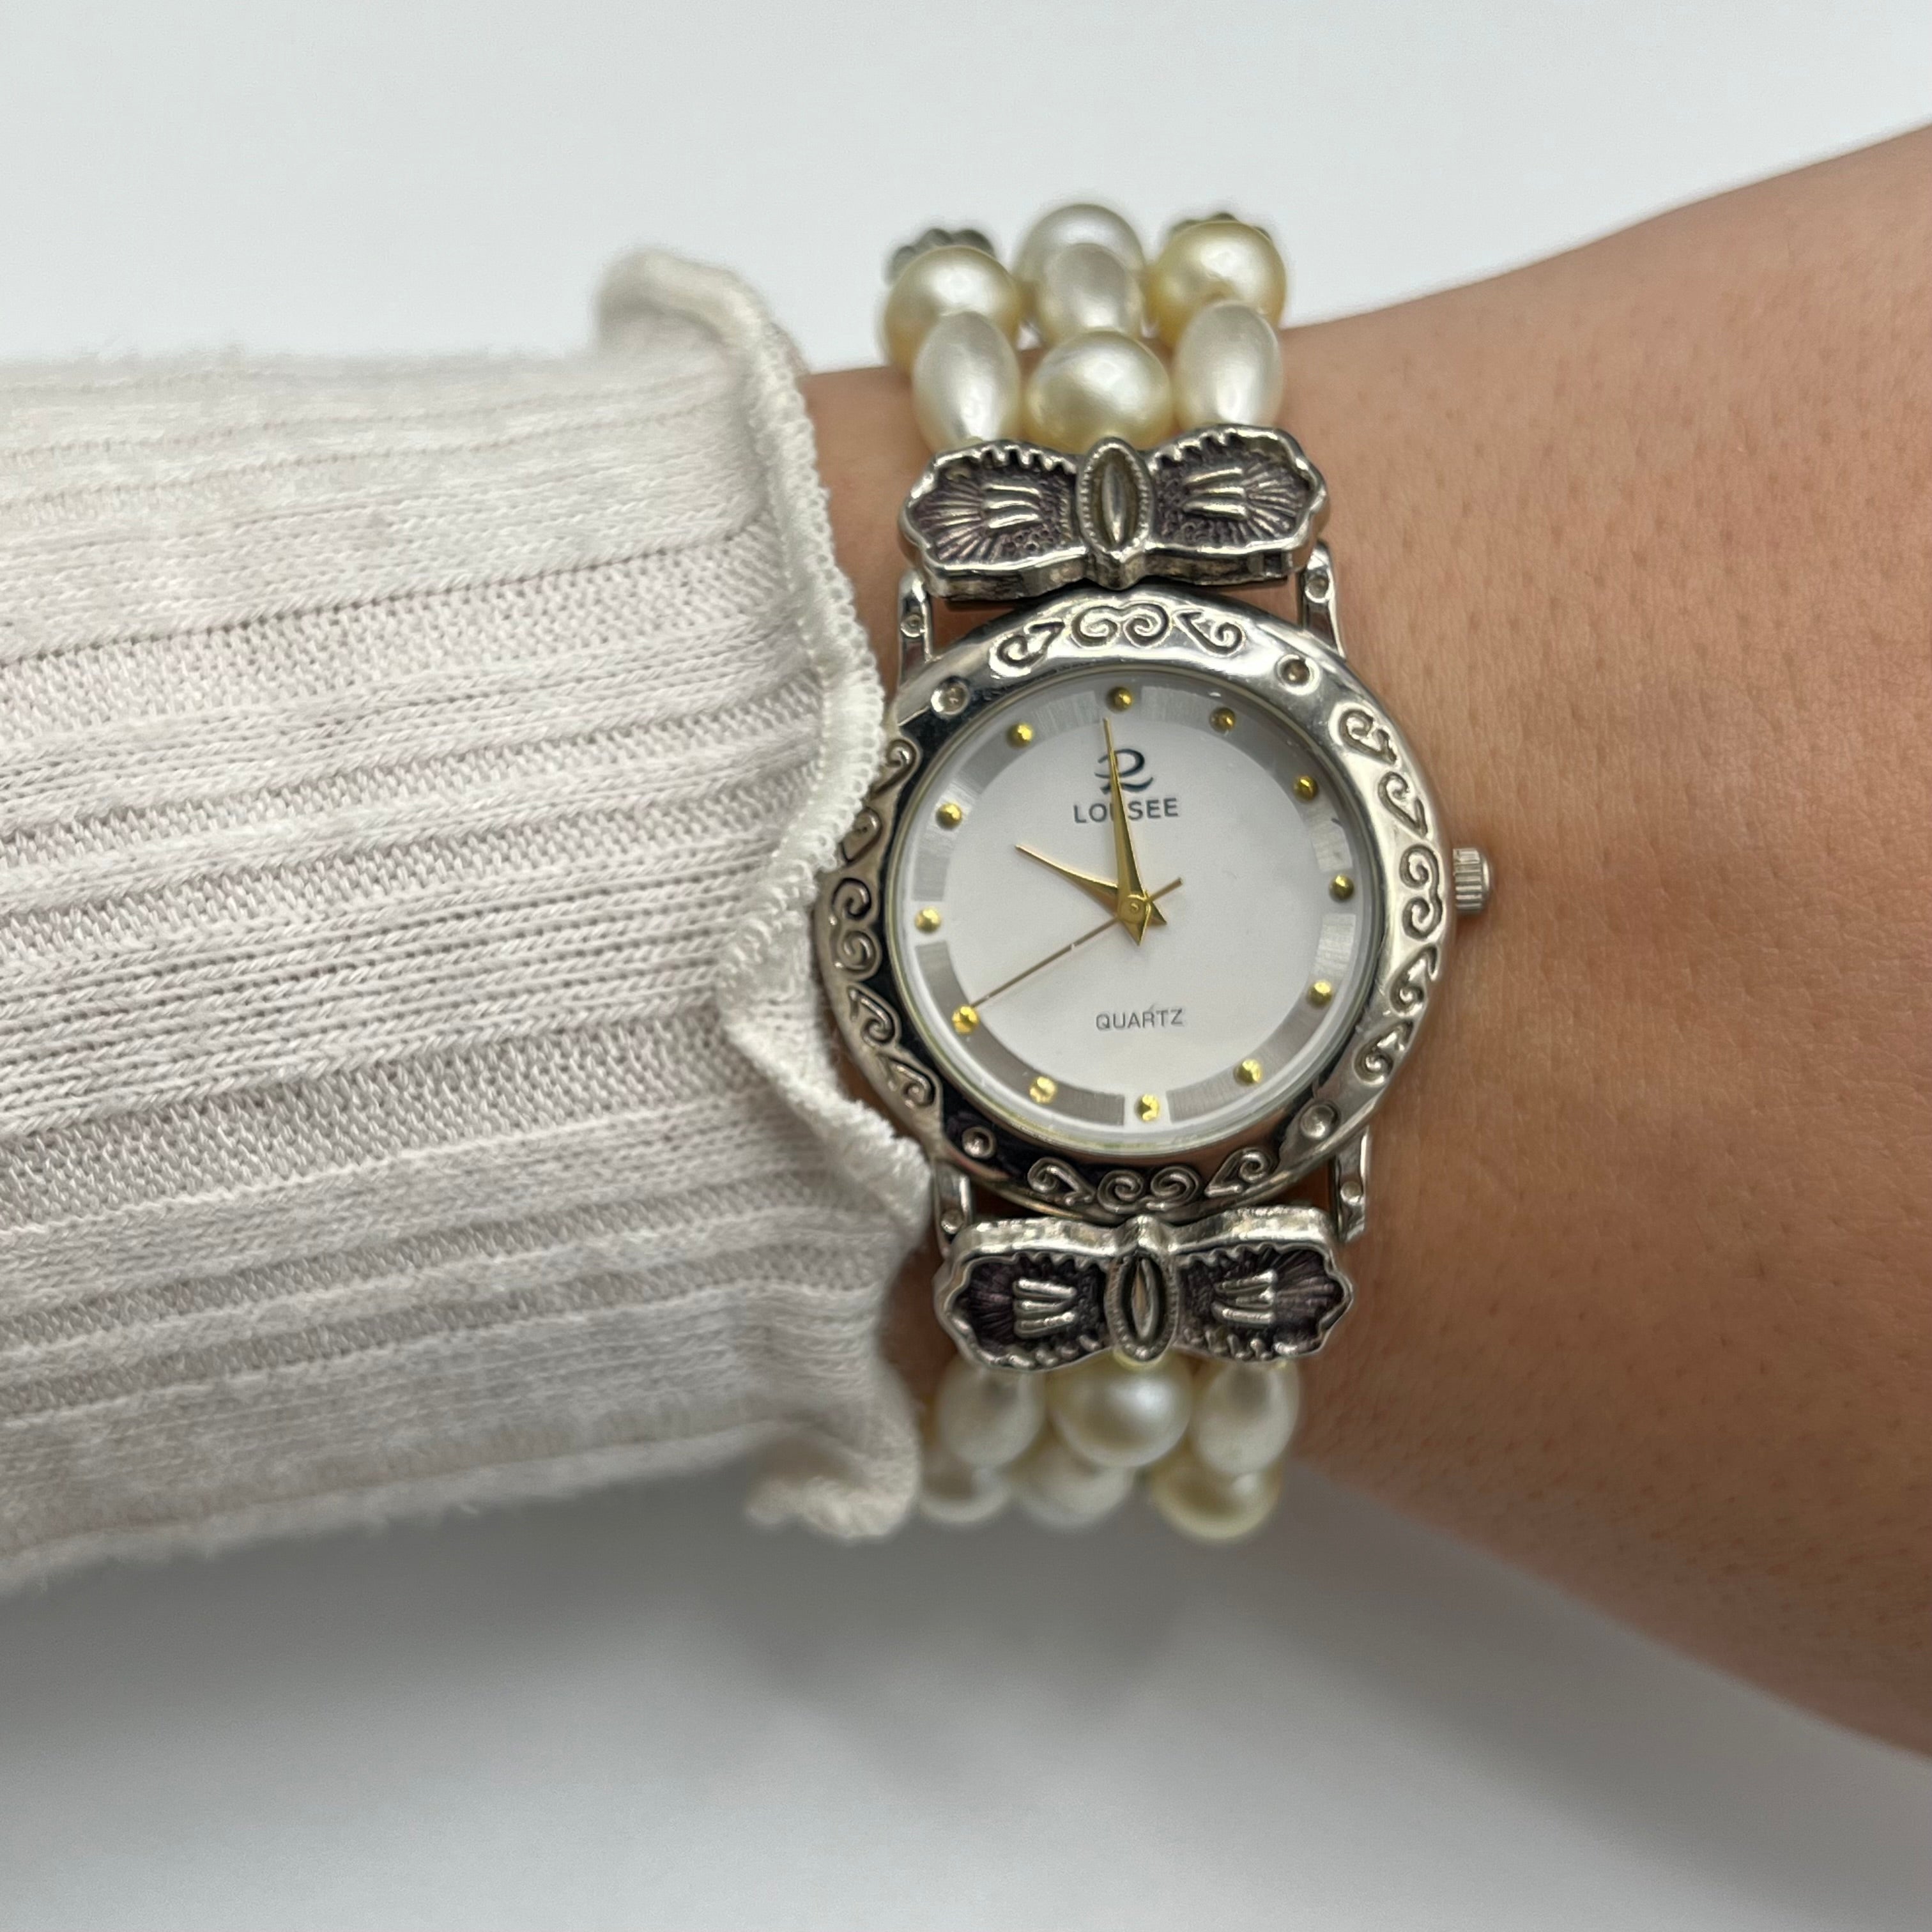 🎀 Silver-Toned Pearl Watch with Bow Detailing